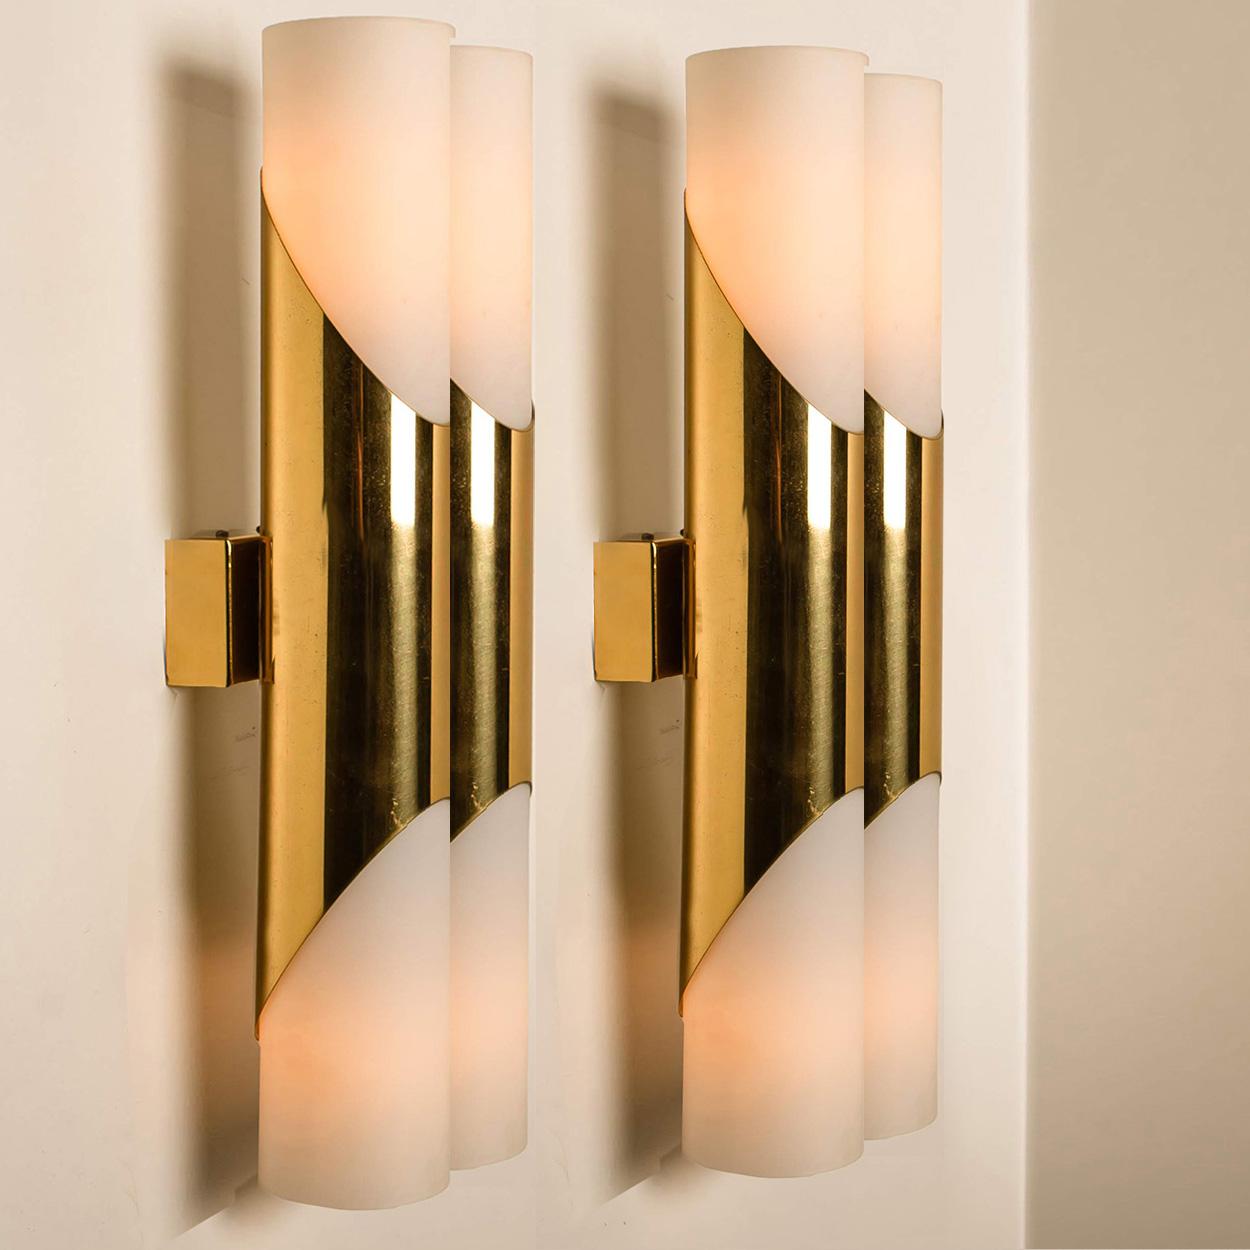 Set stunning sconces designed in the style of RAAK. Minimalistic design executed with a taste for excellence in craftsmanship.
Good condition that means this piece is not new but in a very good vintage condition with some beautiful minor signs of